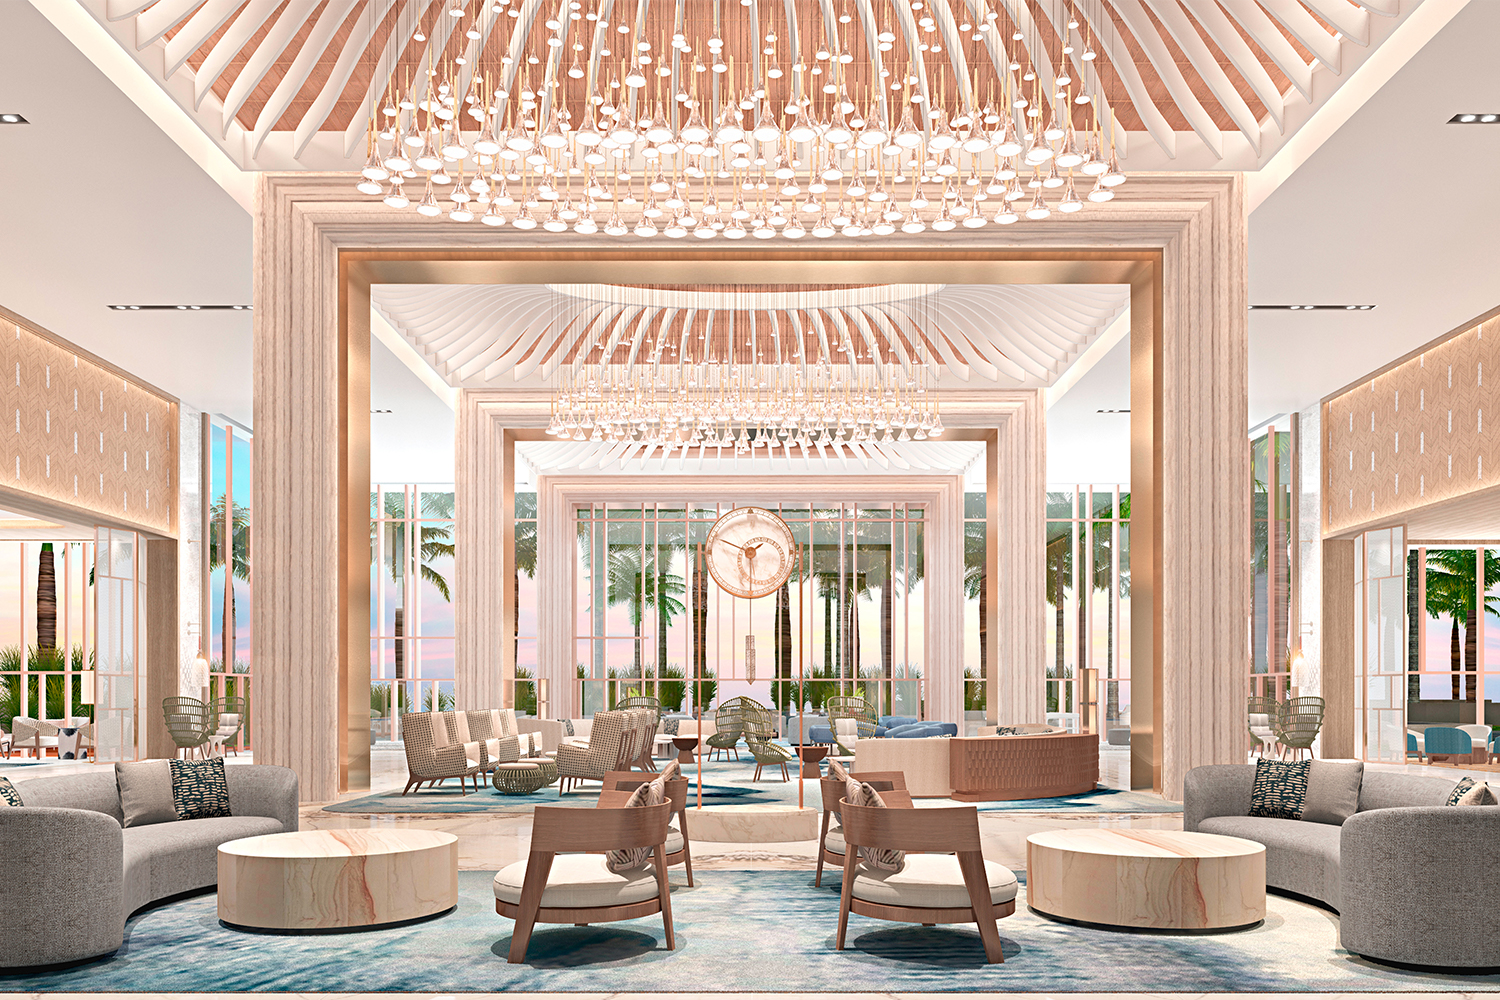 A view of the lobby in the new Waldorf Astoria Cancun resort